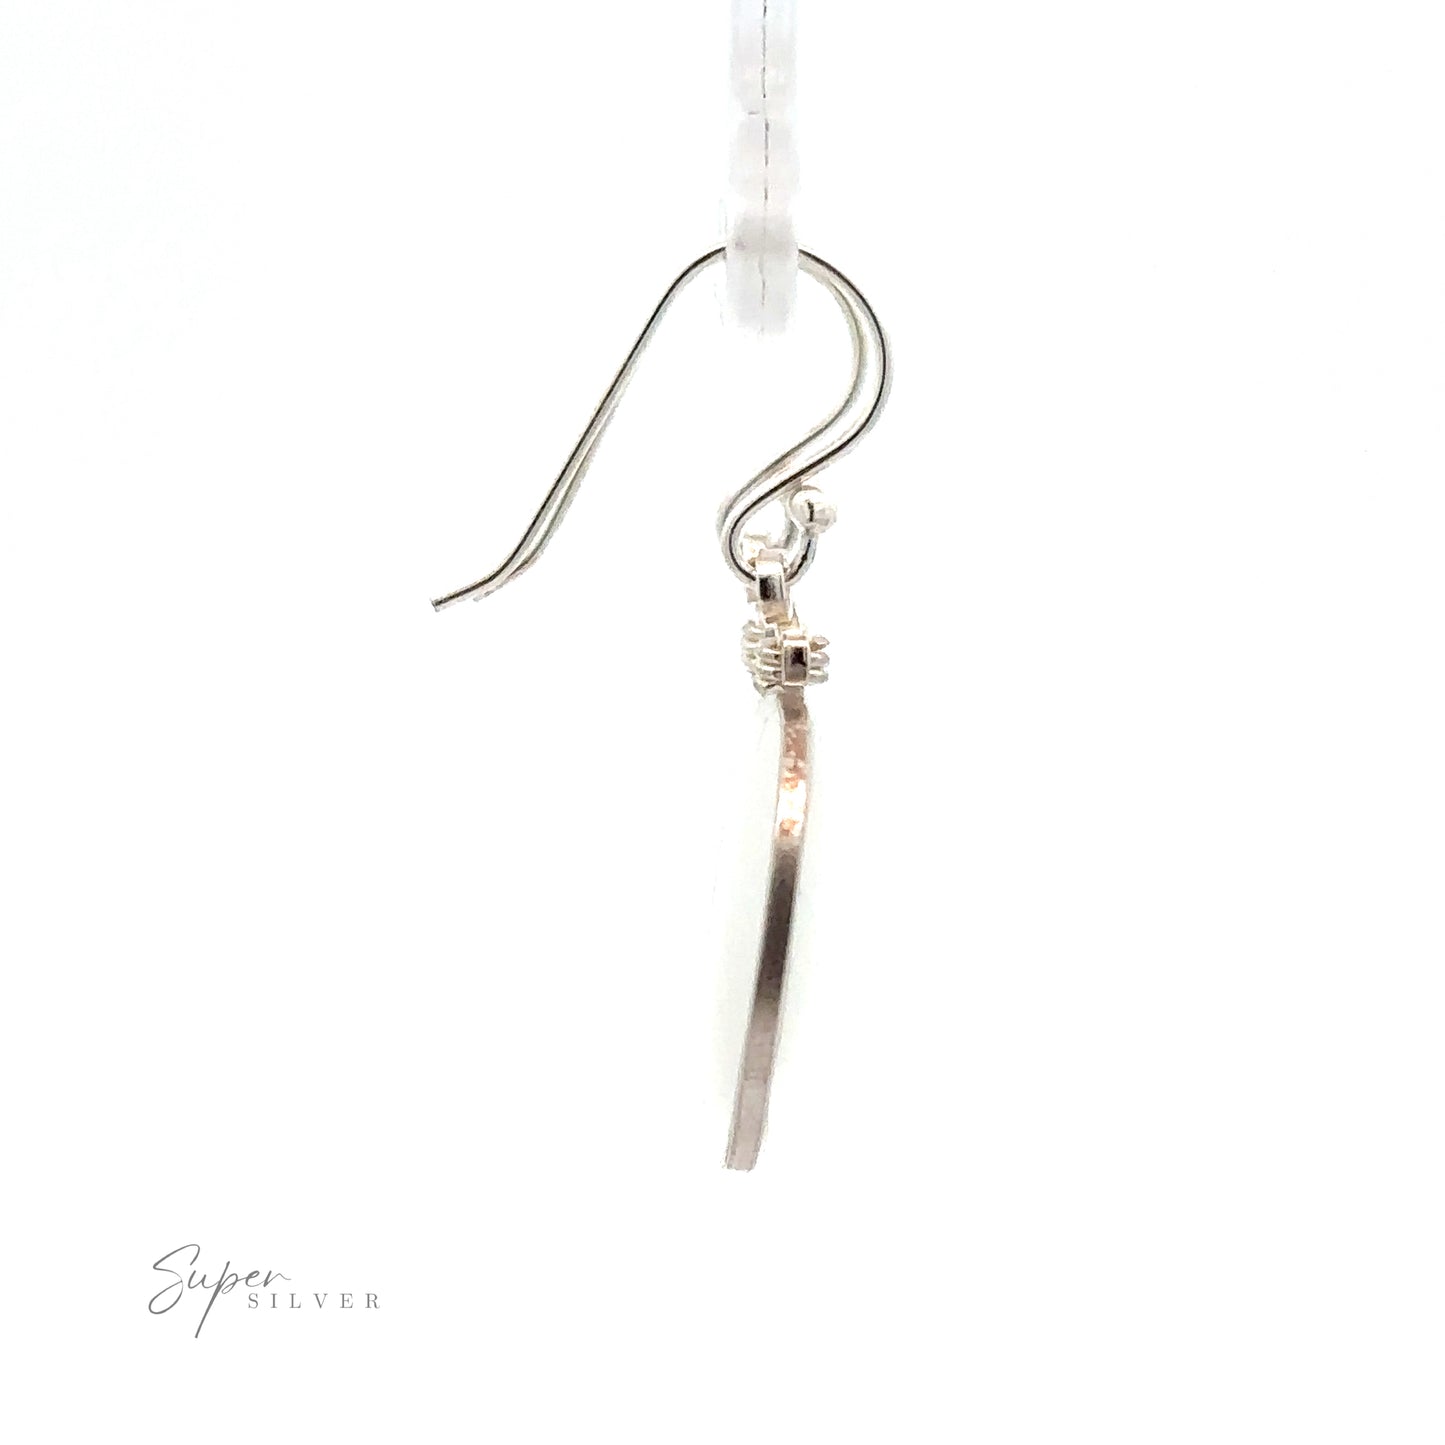 
                  
                    Side view of a single Round Glass Earring with a thin, flat disc charm suspended from a clear plastic holder. The brand name "Super Silver" is visible in small text at the bottom left corner.
                  
                